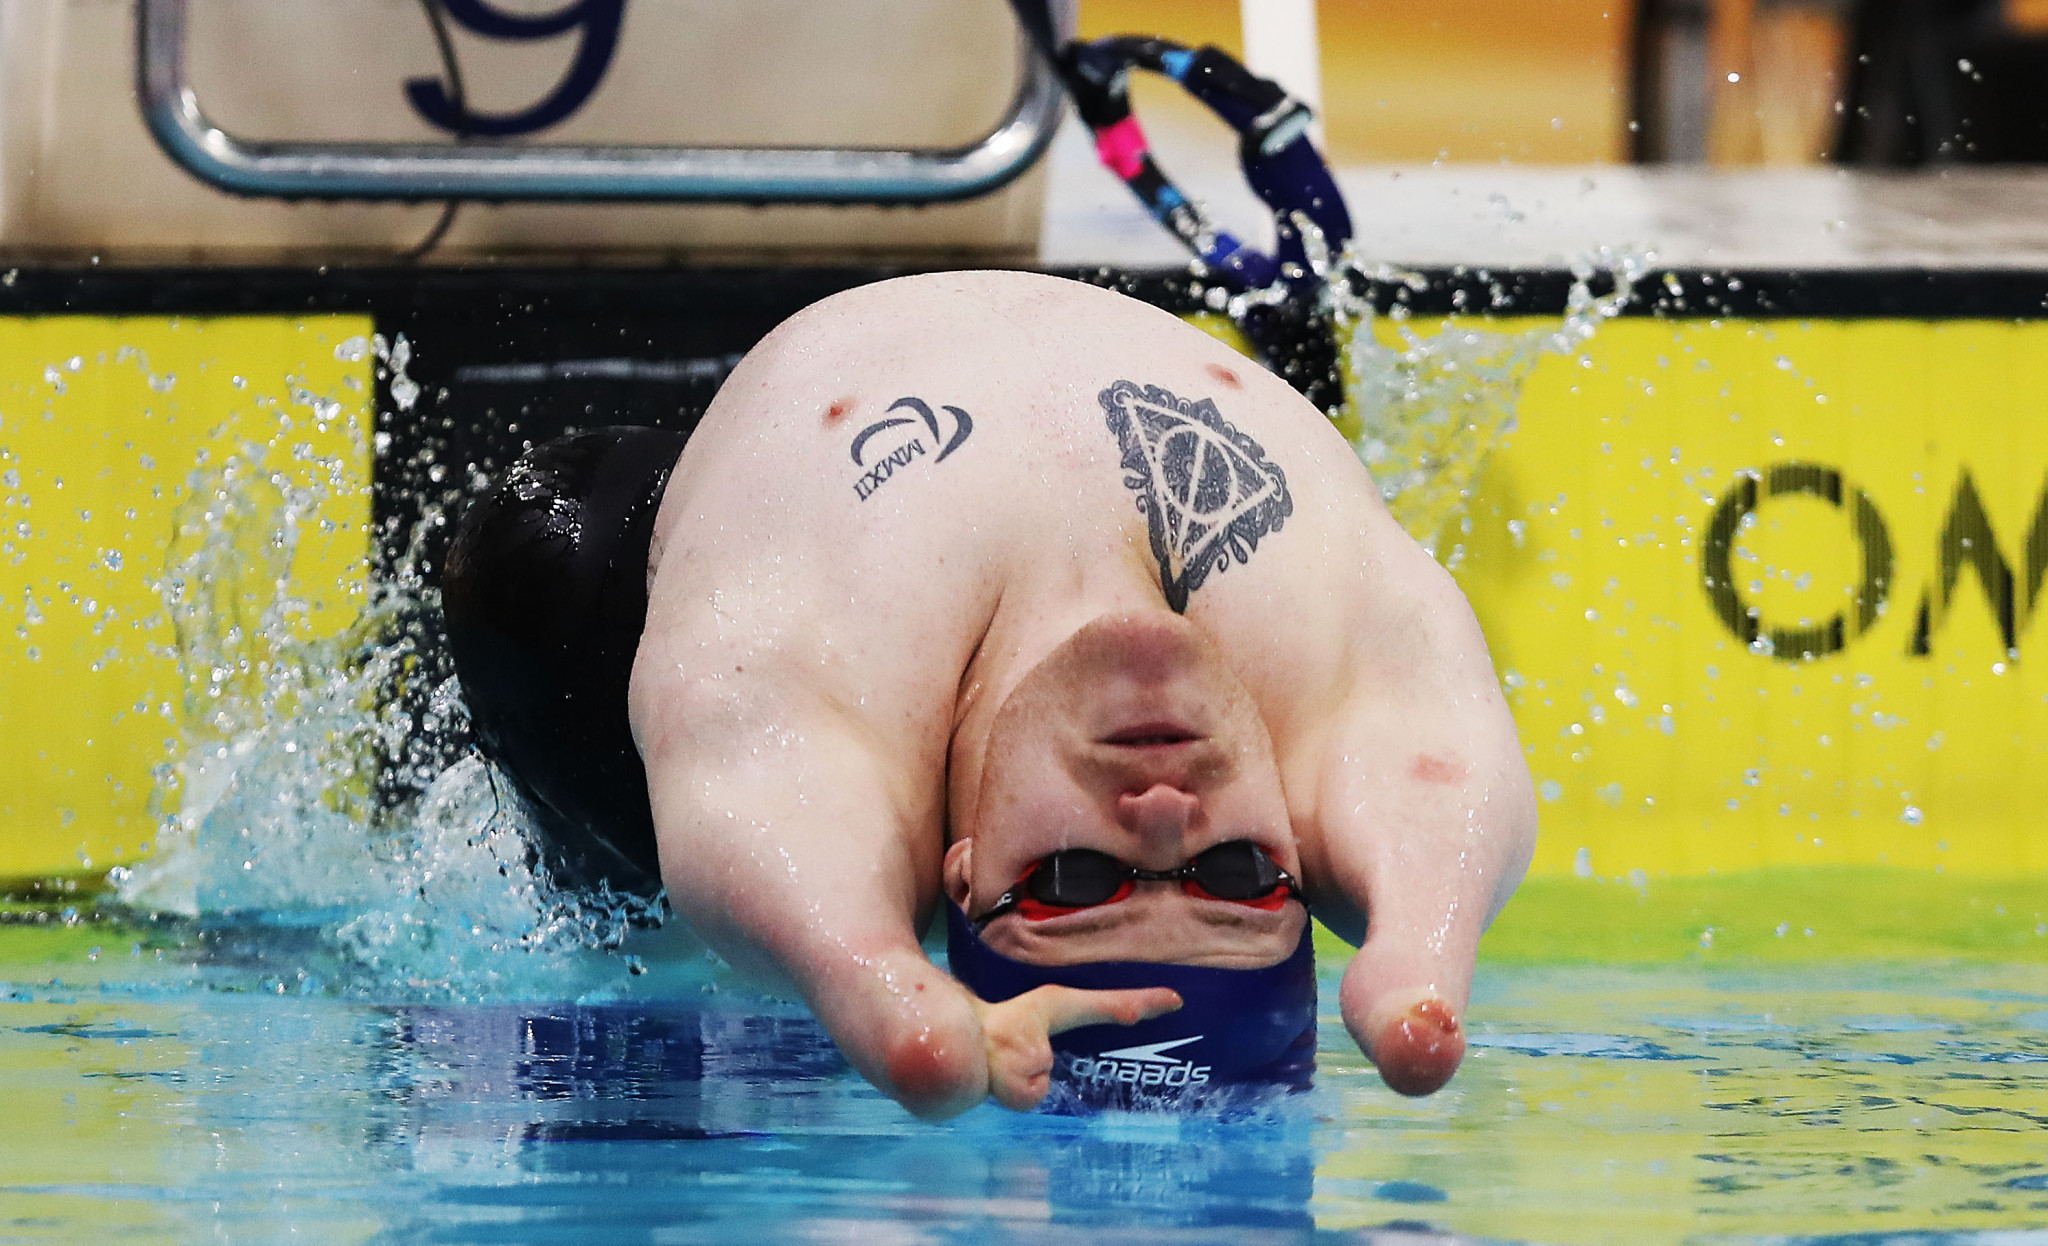 Dates and venues confirmed for 2020 World Para Swimming World Series